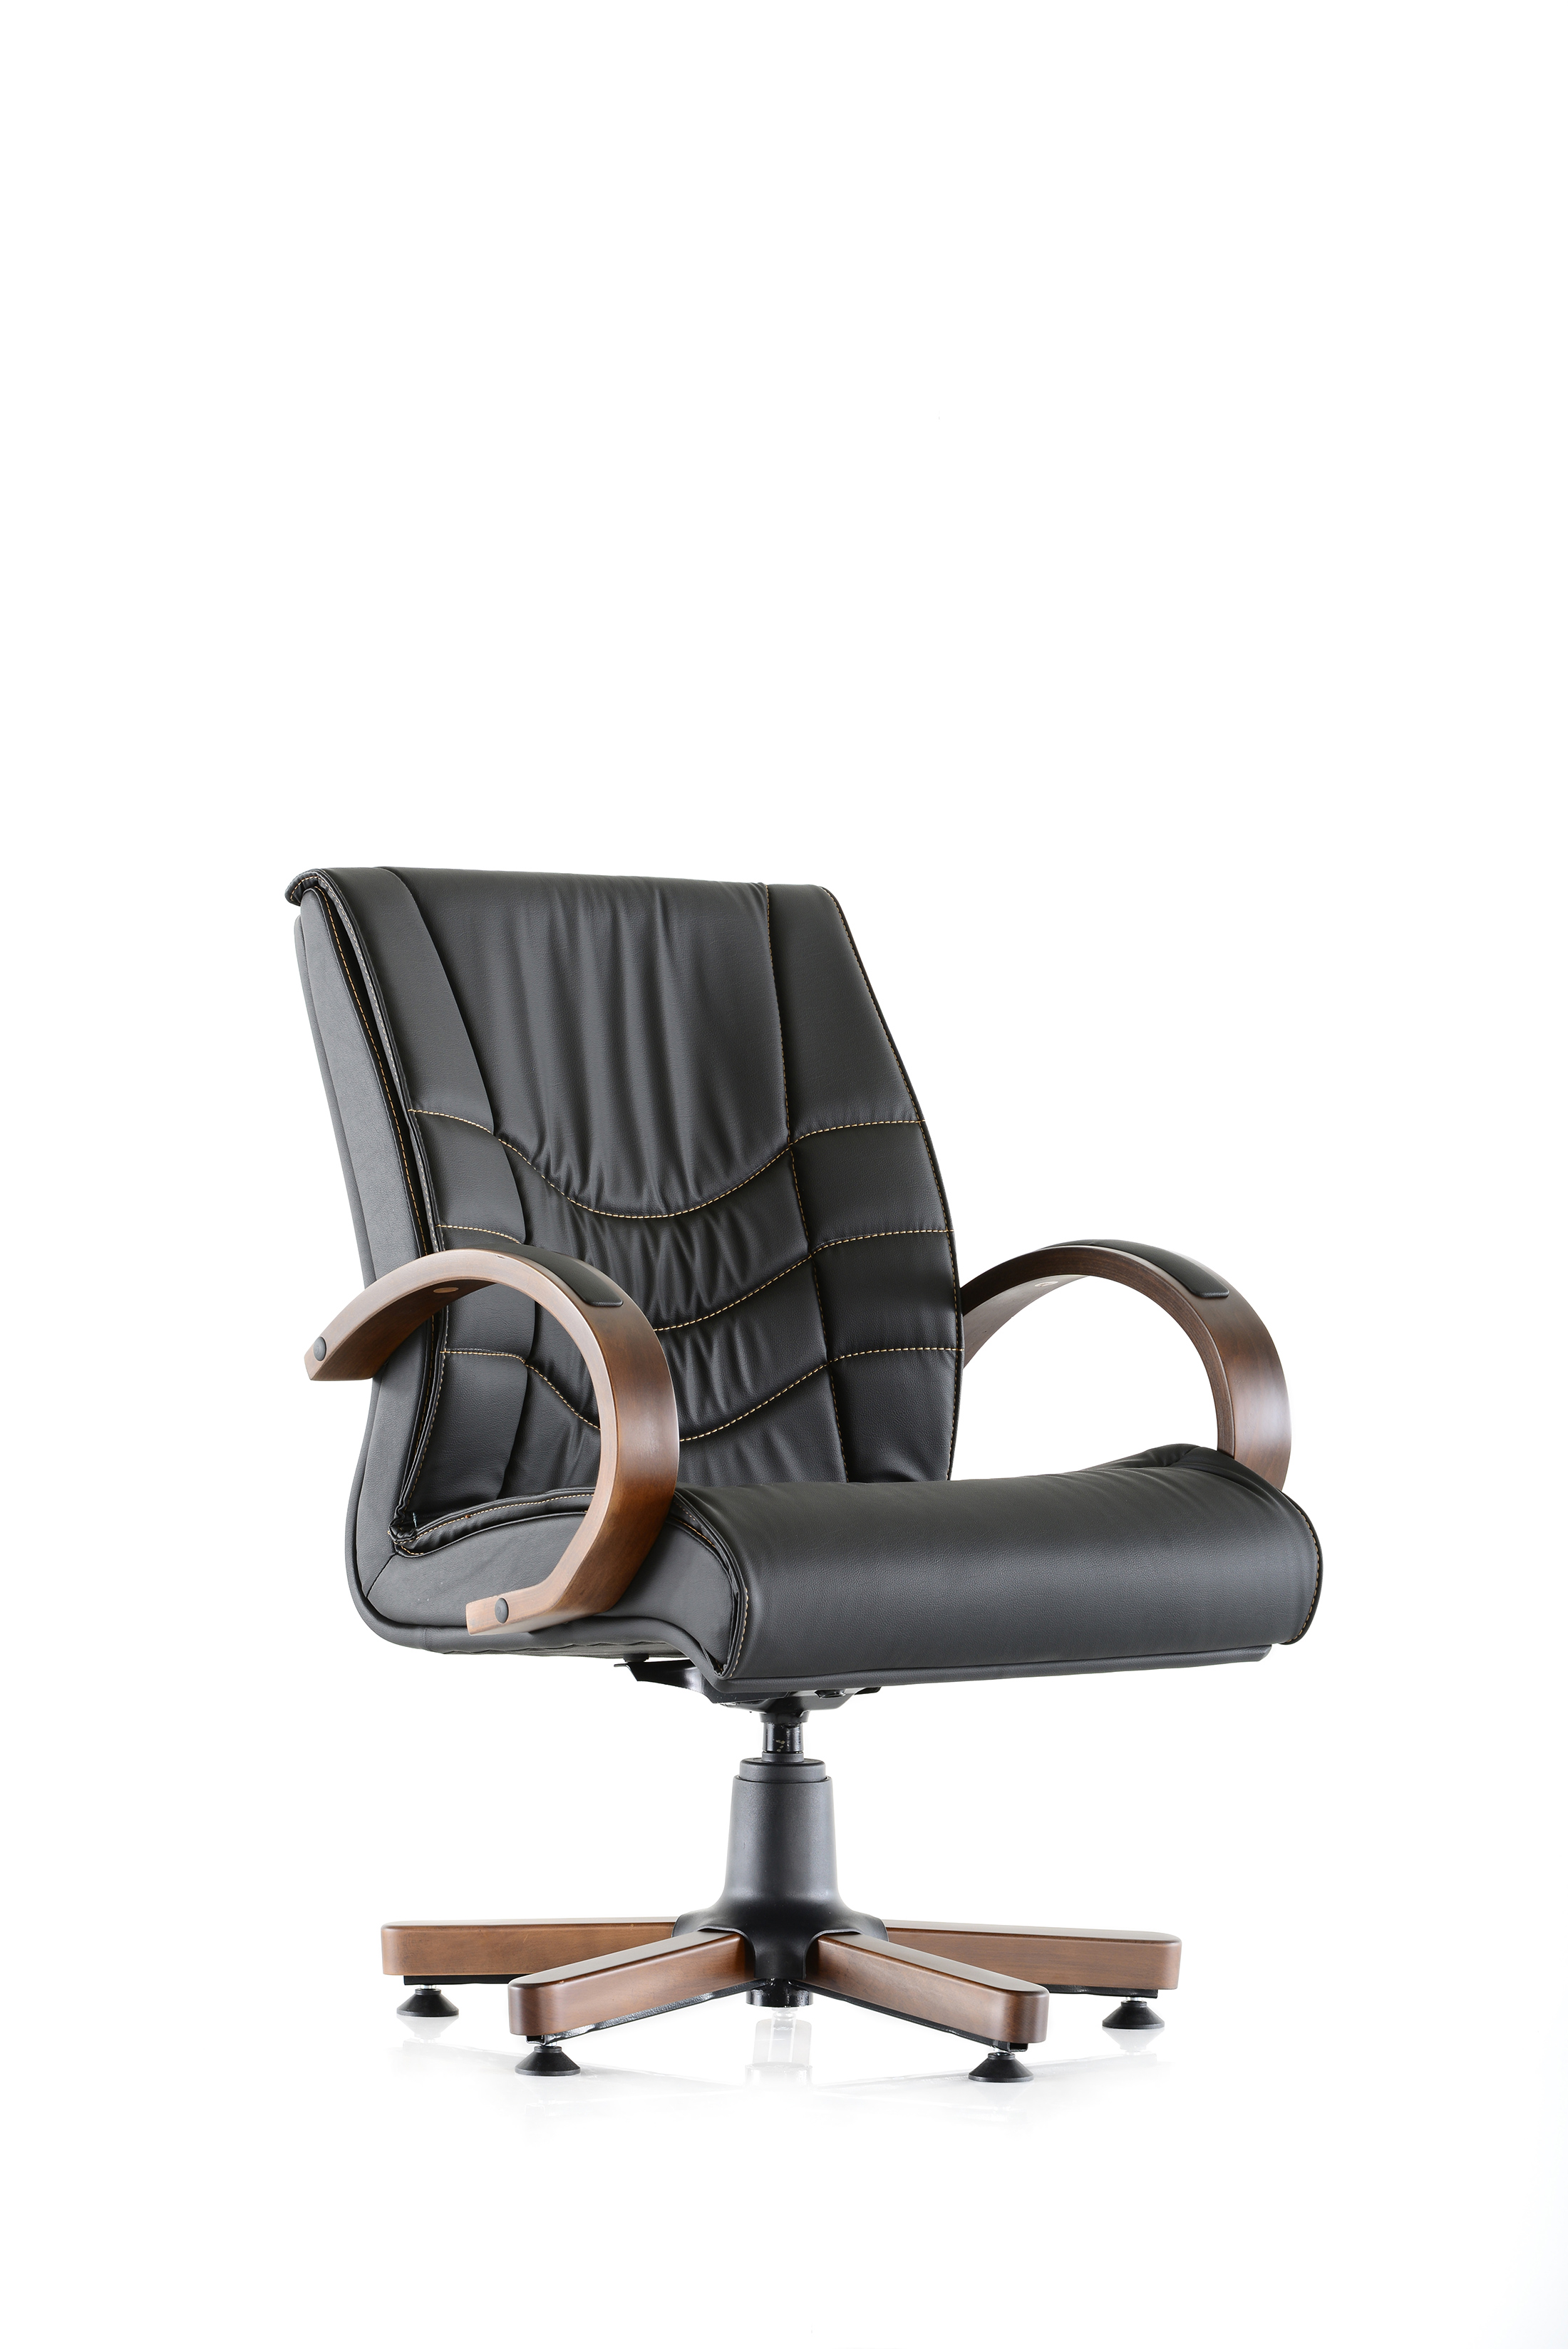 STYLE 200N VISITOR CHAIR